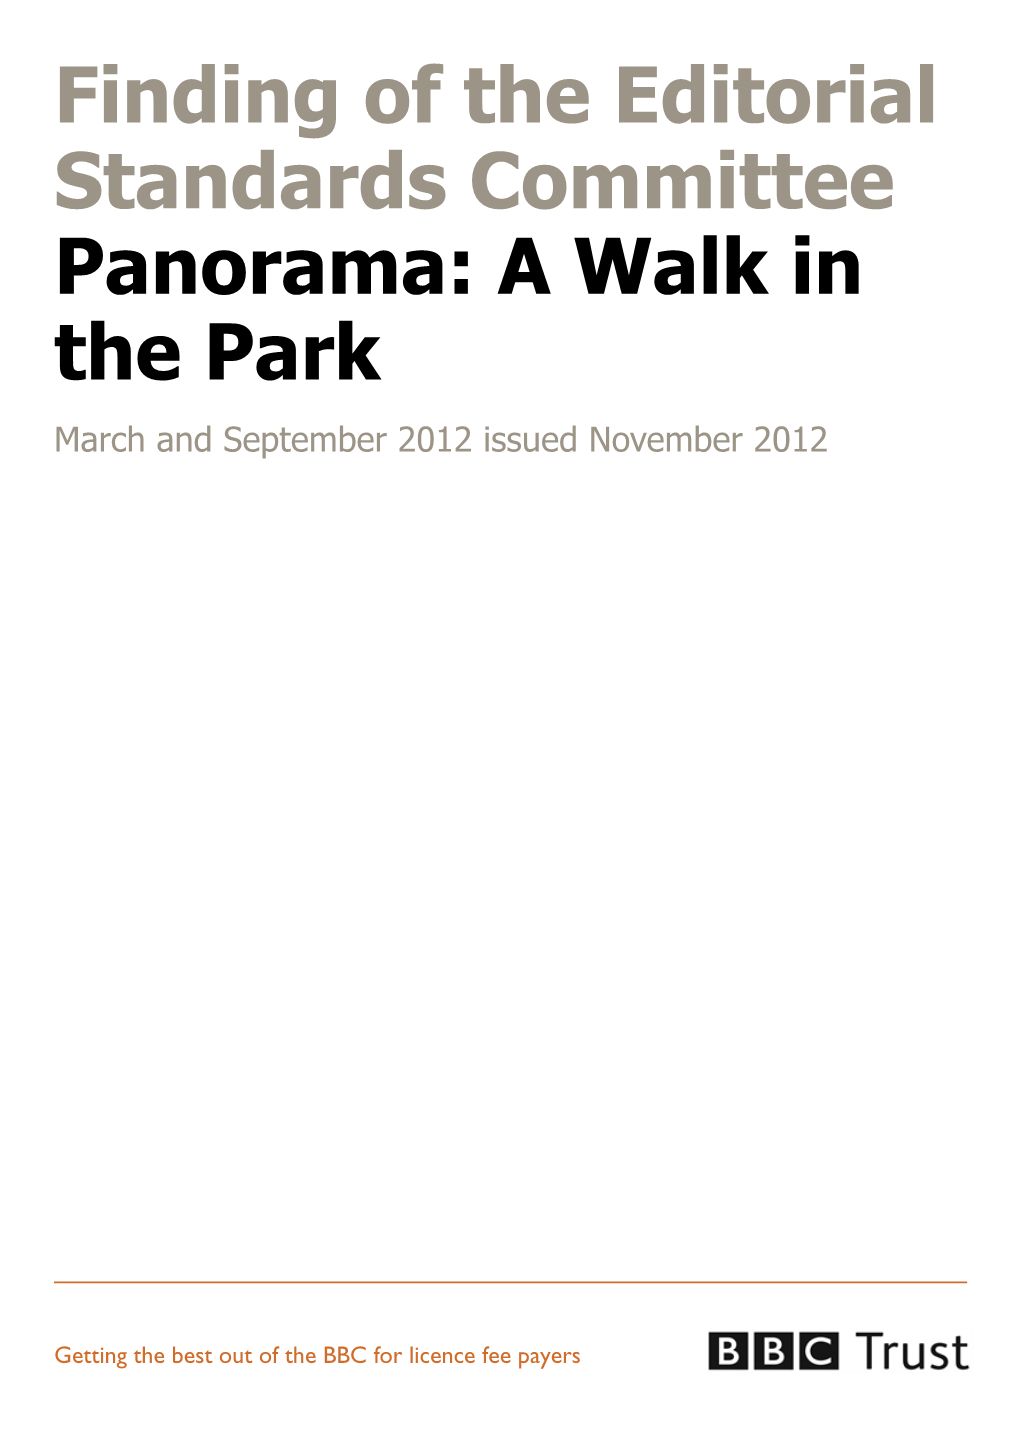 Panorama: a Walk in the Park March and September 2012 Issued November 2012